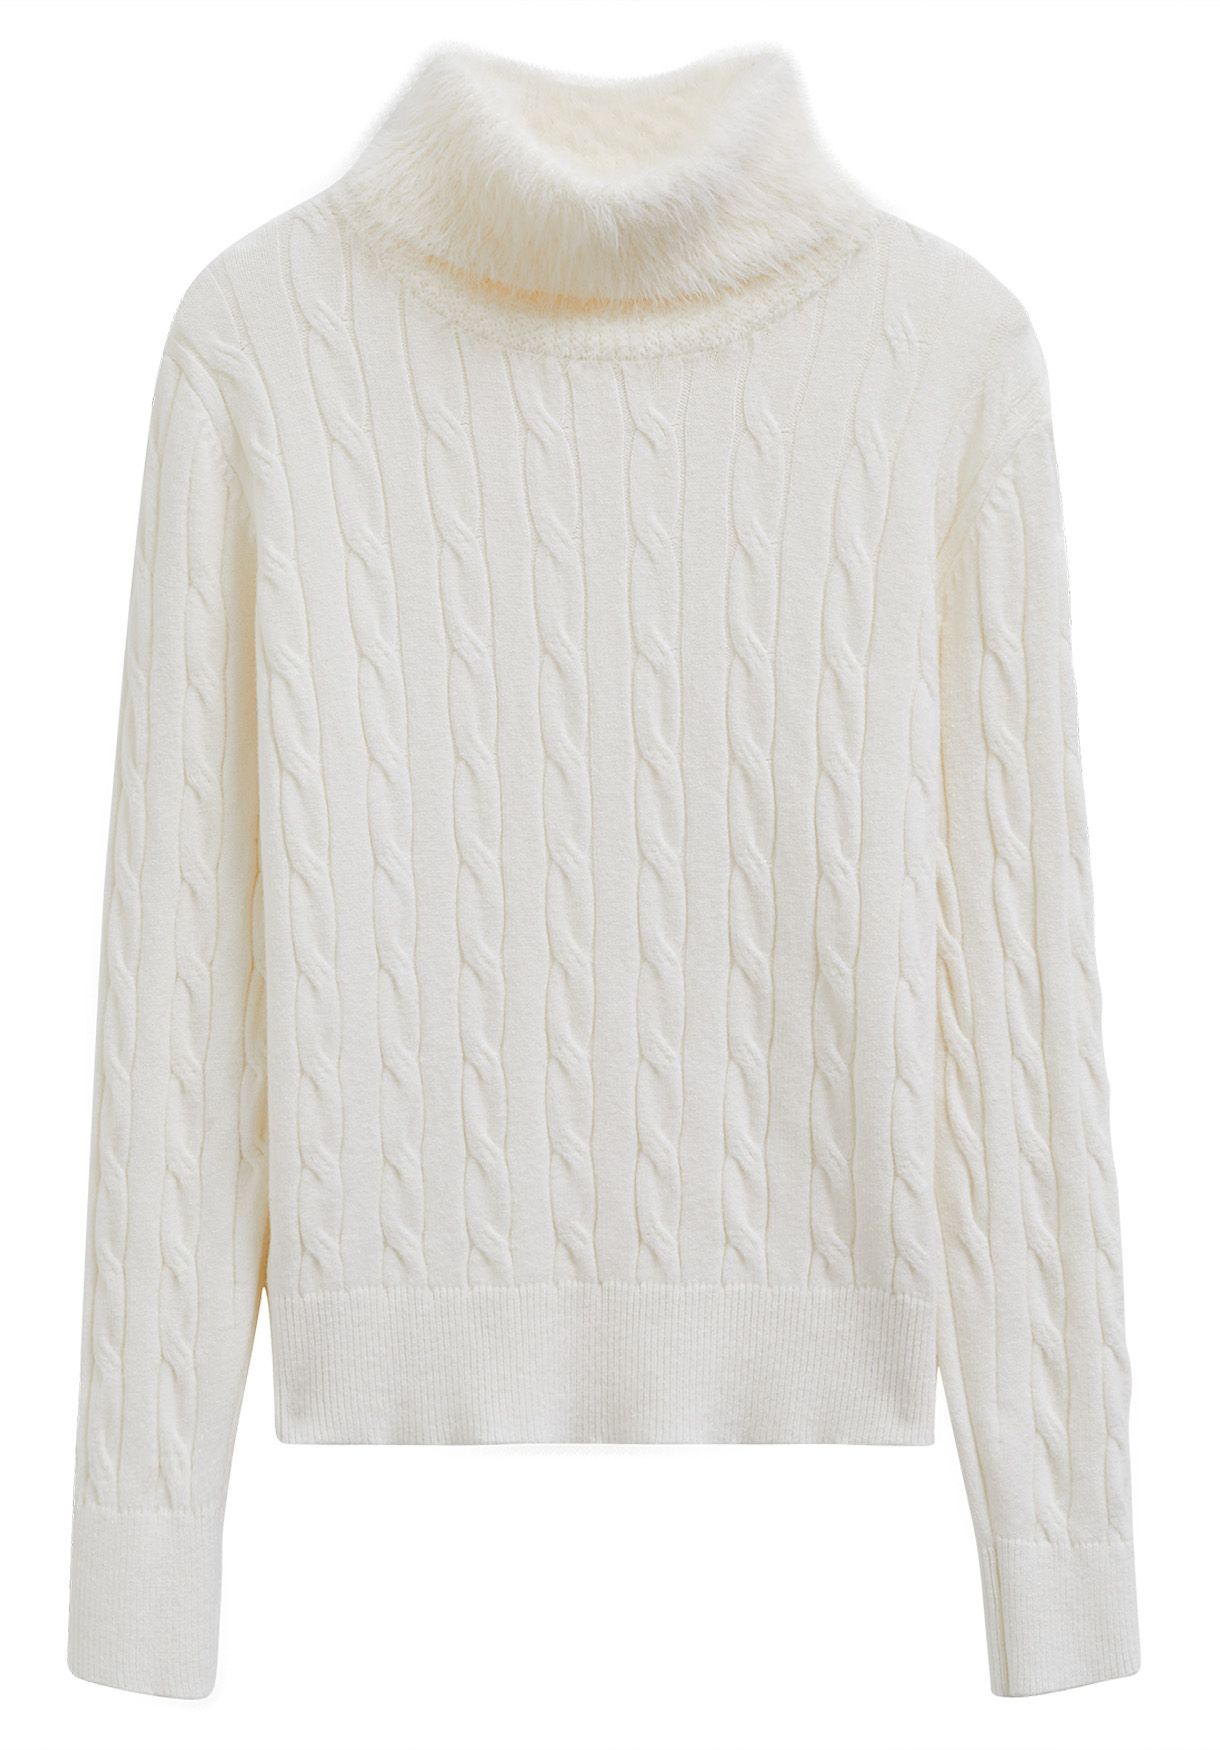 Soft Fuzzy Turtleneck Cable Knit Sweater in Cream